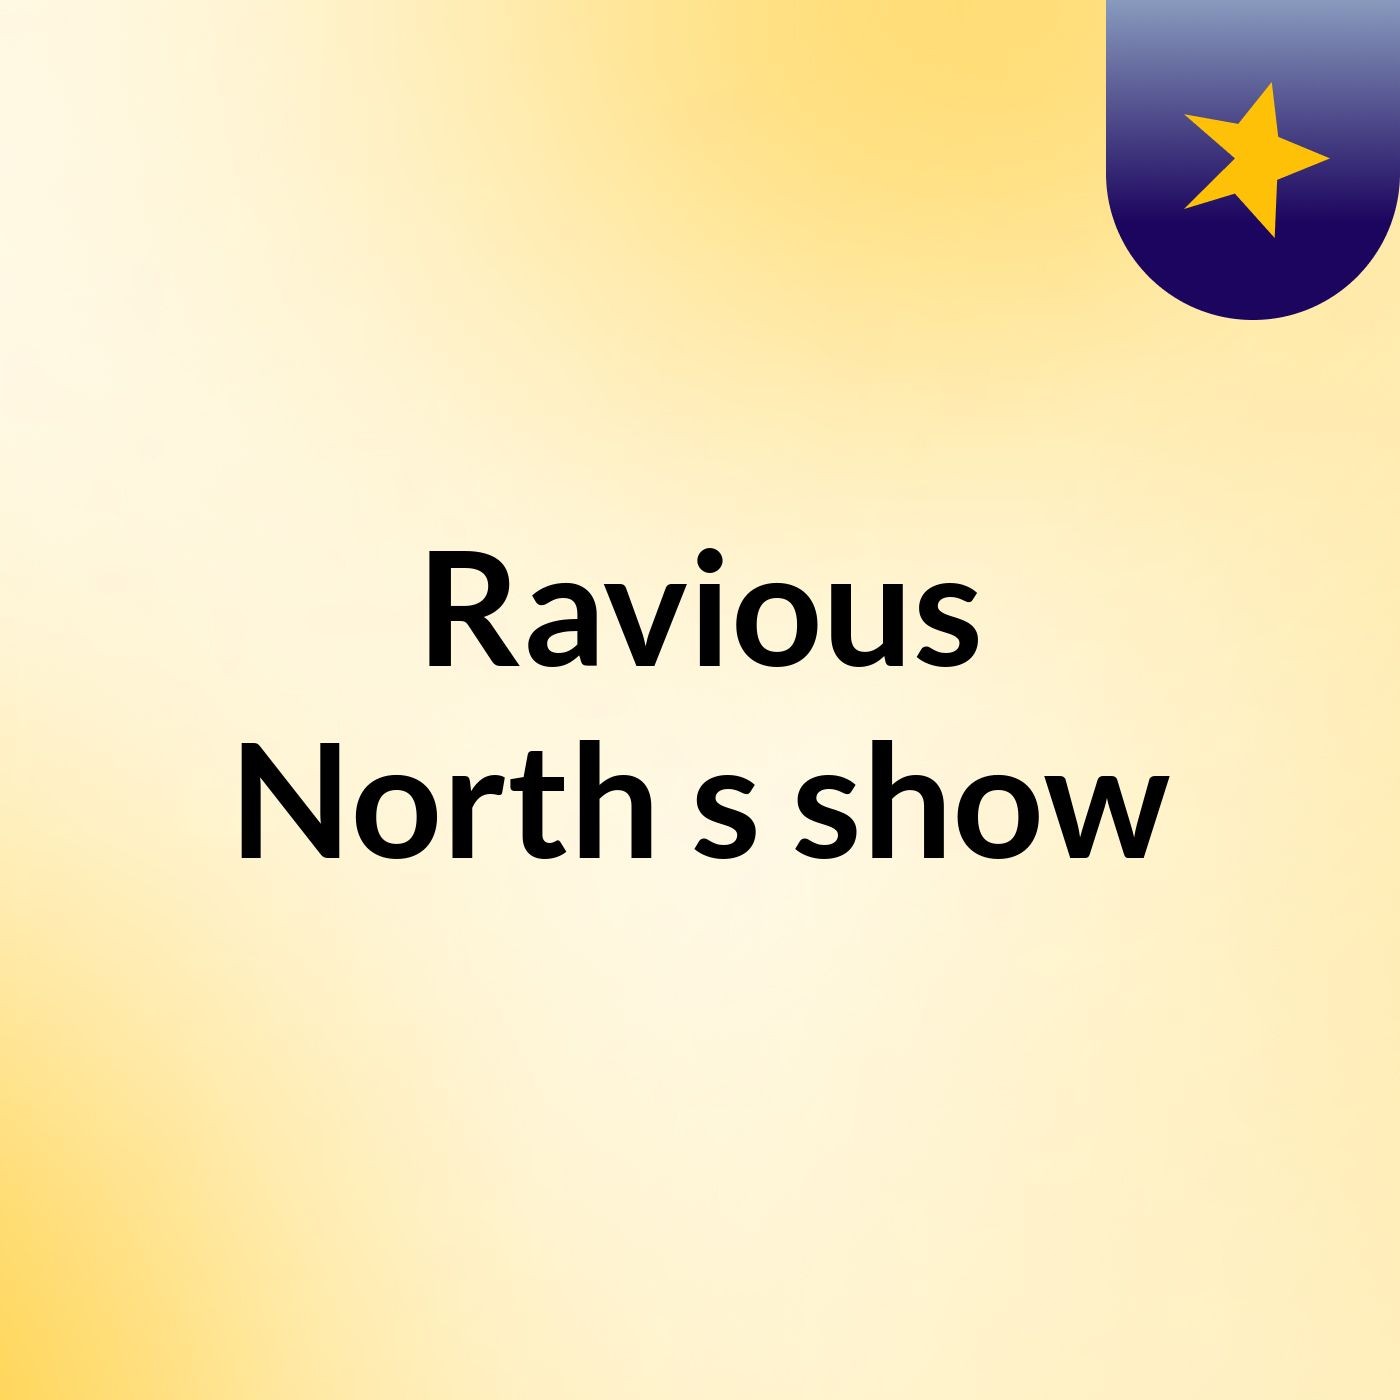 Episode 4 - Ravious North's show